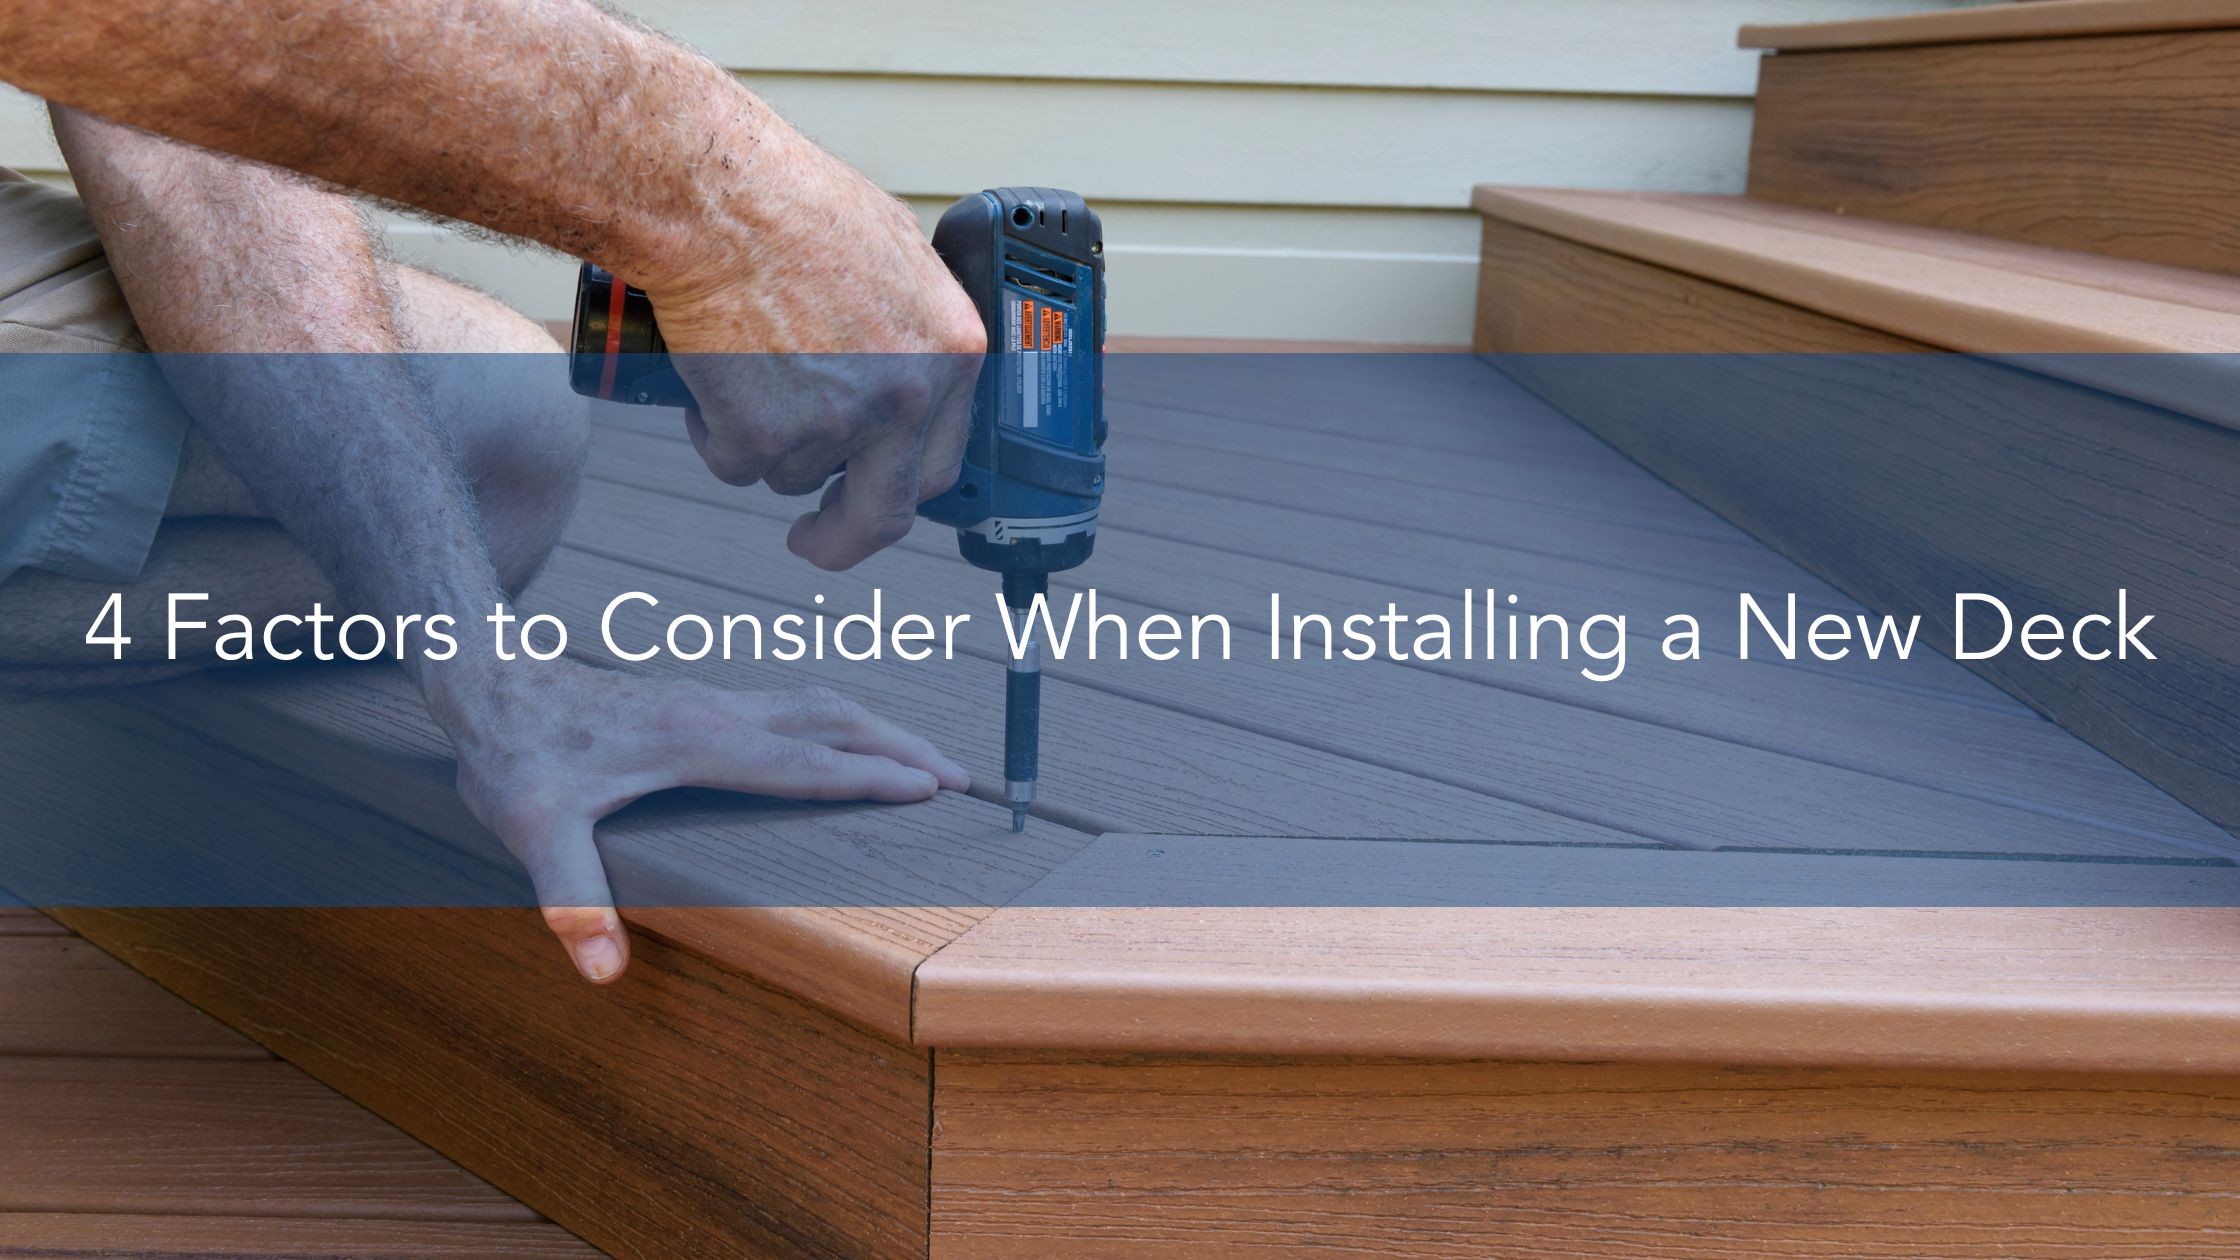 4 Factors to Consider When Installing a New Deck